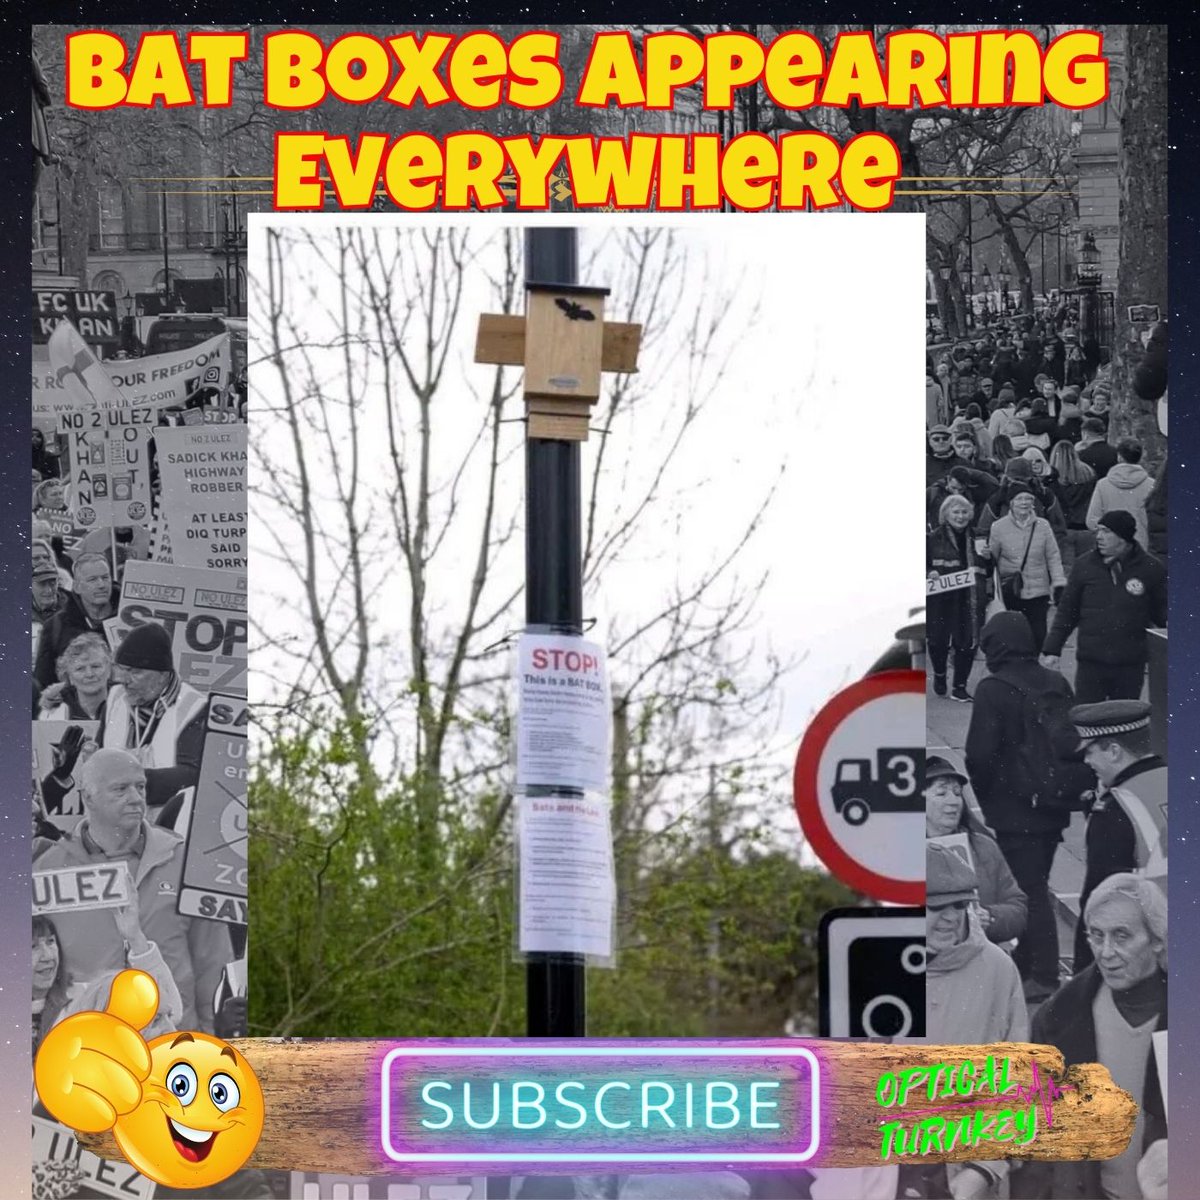 Bat Boxes slowing the new ULEZ camera installs!
#getkhanout #notoulez #wewillnotcomply
🎉👍💪🚫💪👍🚫💪👍🚫🎉